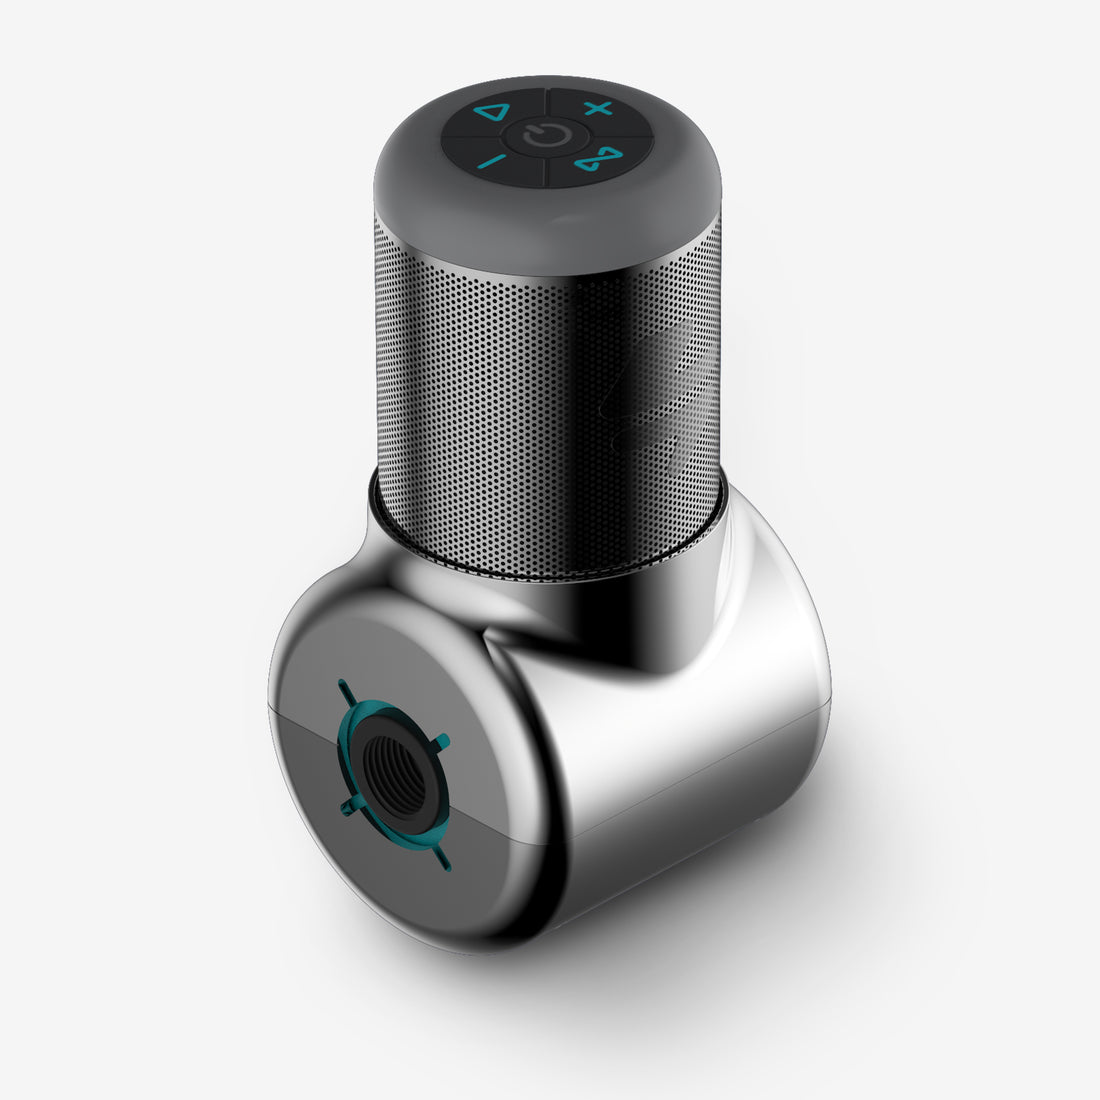 Bluvy Is the Android-Powered Shower Speaker of the Future